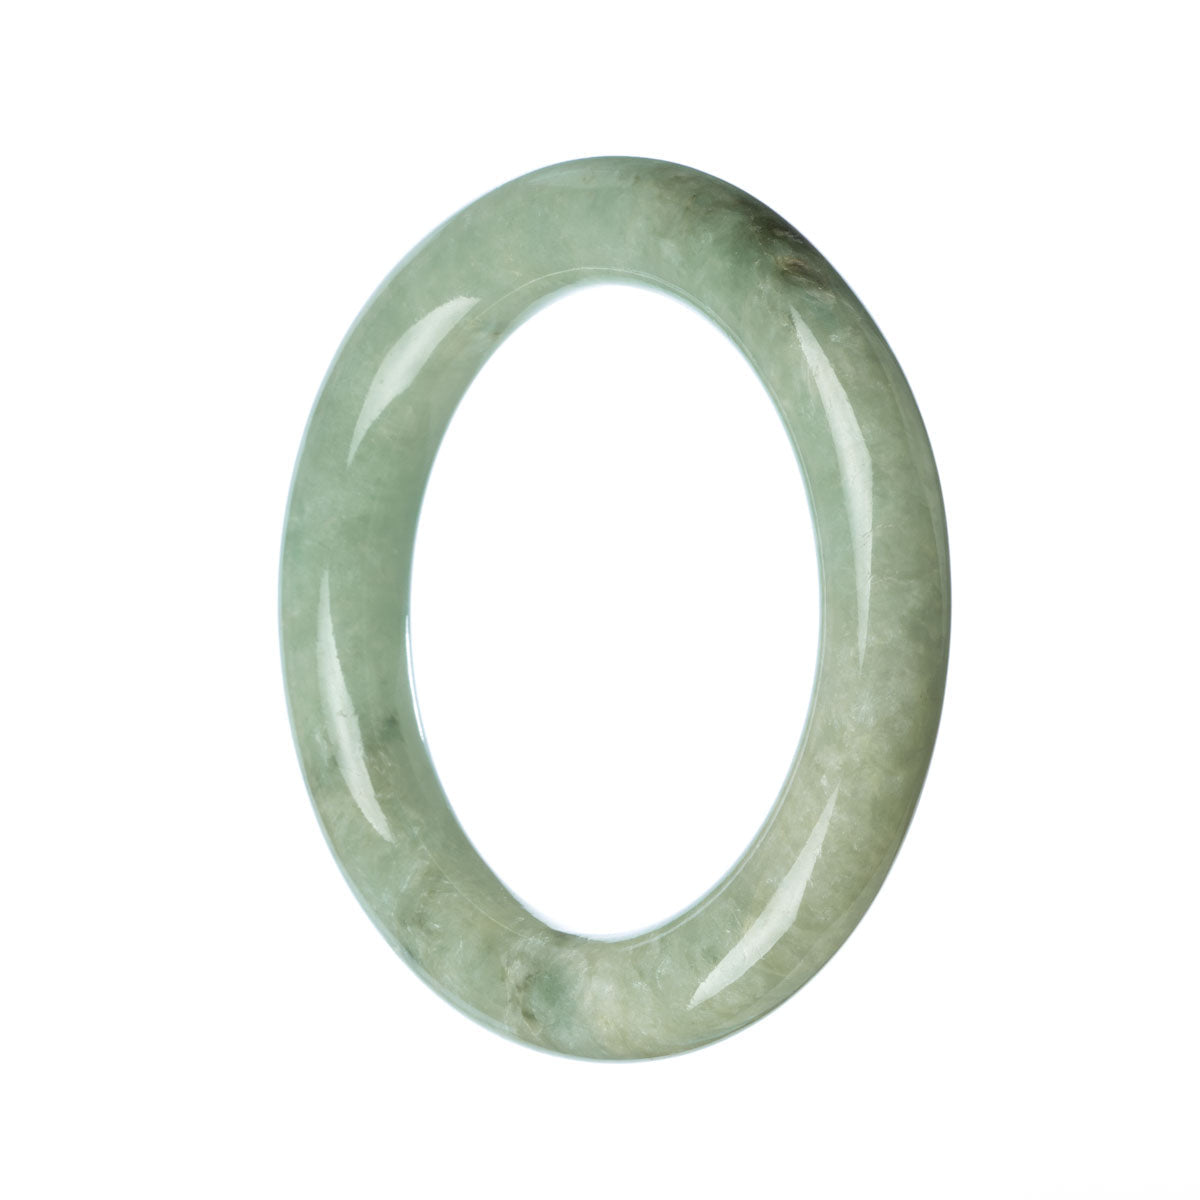 A round, Grade A Green Burmese Jade Bangle measuring 58mm in diameter, known for its authenticity and quality. Manufactured by MAYS™.